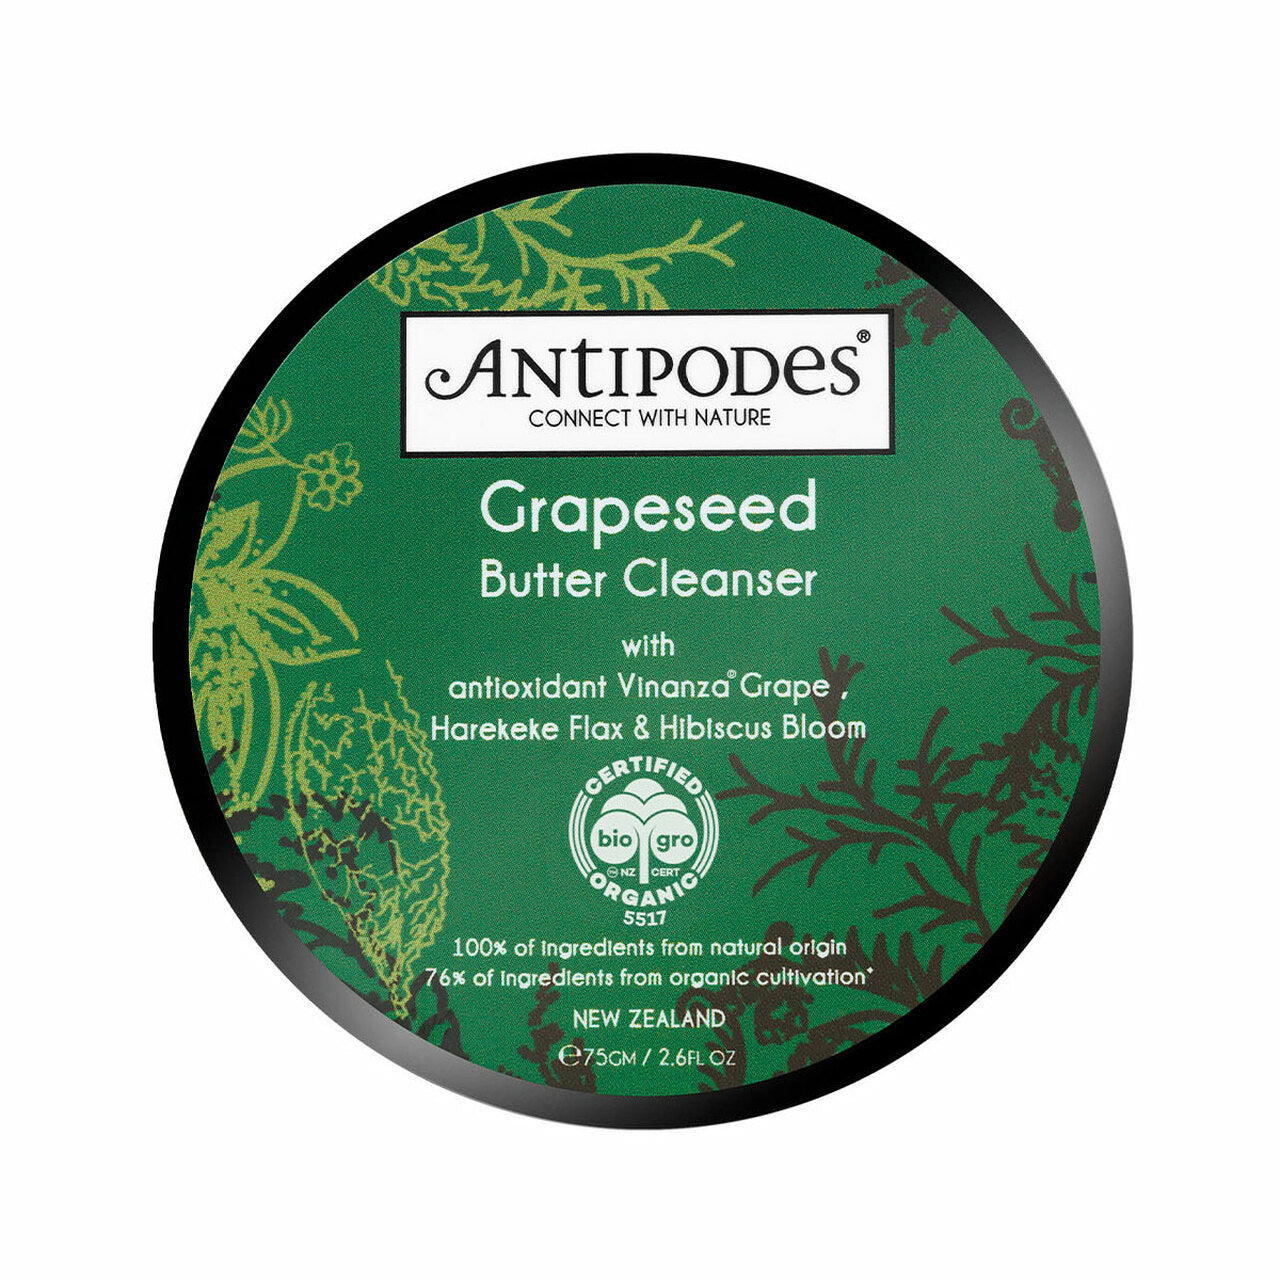 Antipodes Grapeseed Butter Cleanser 75g.